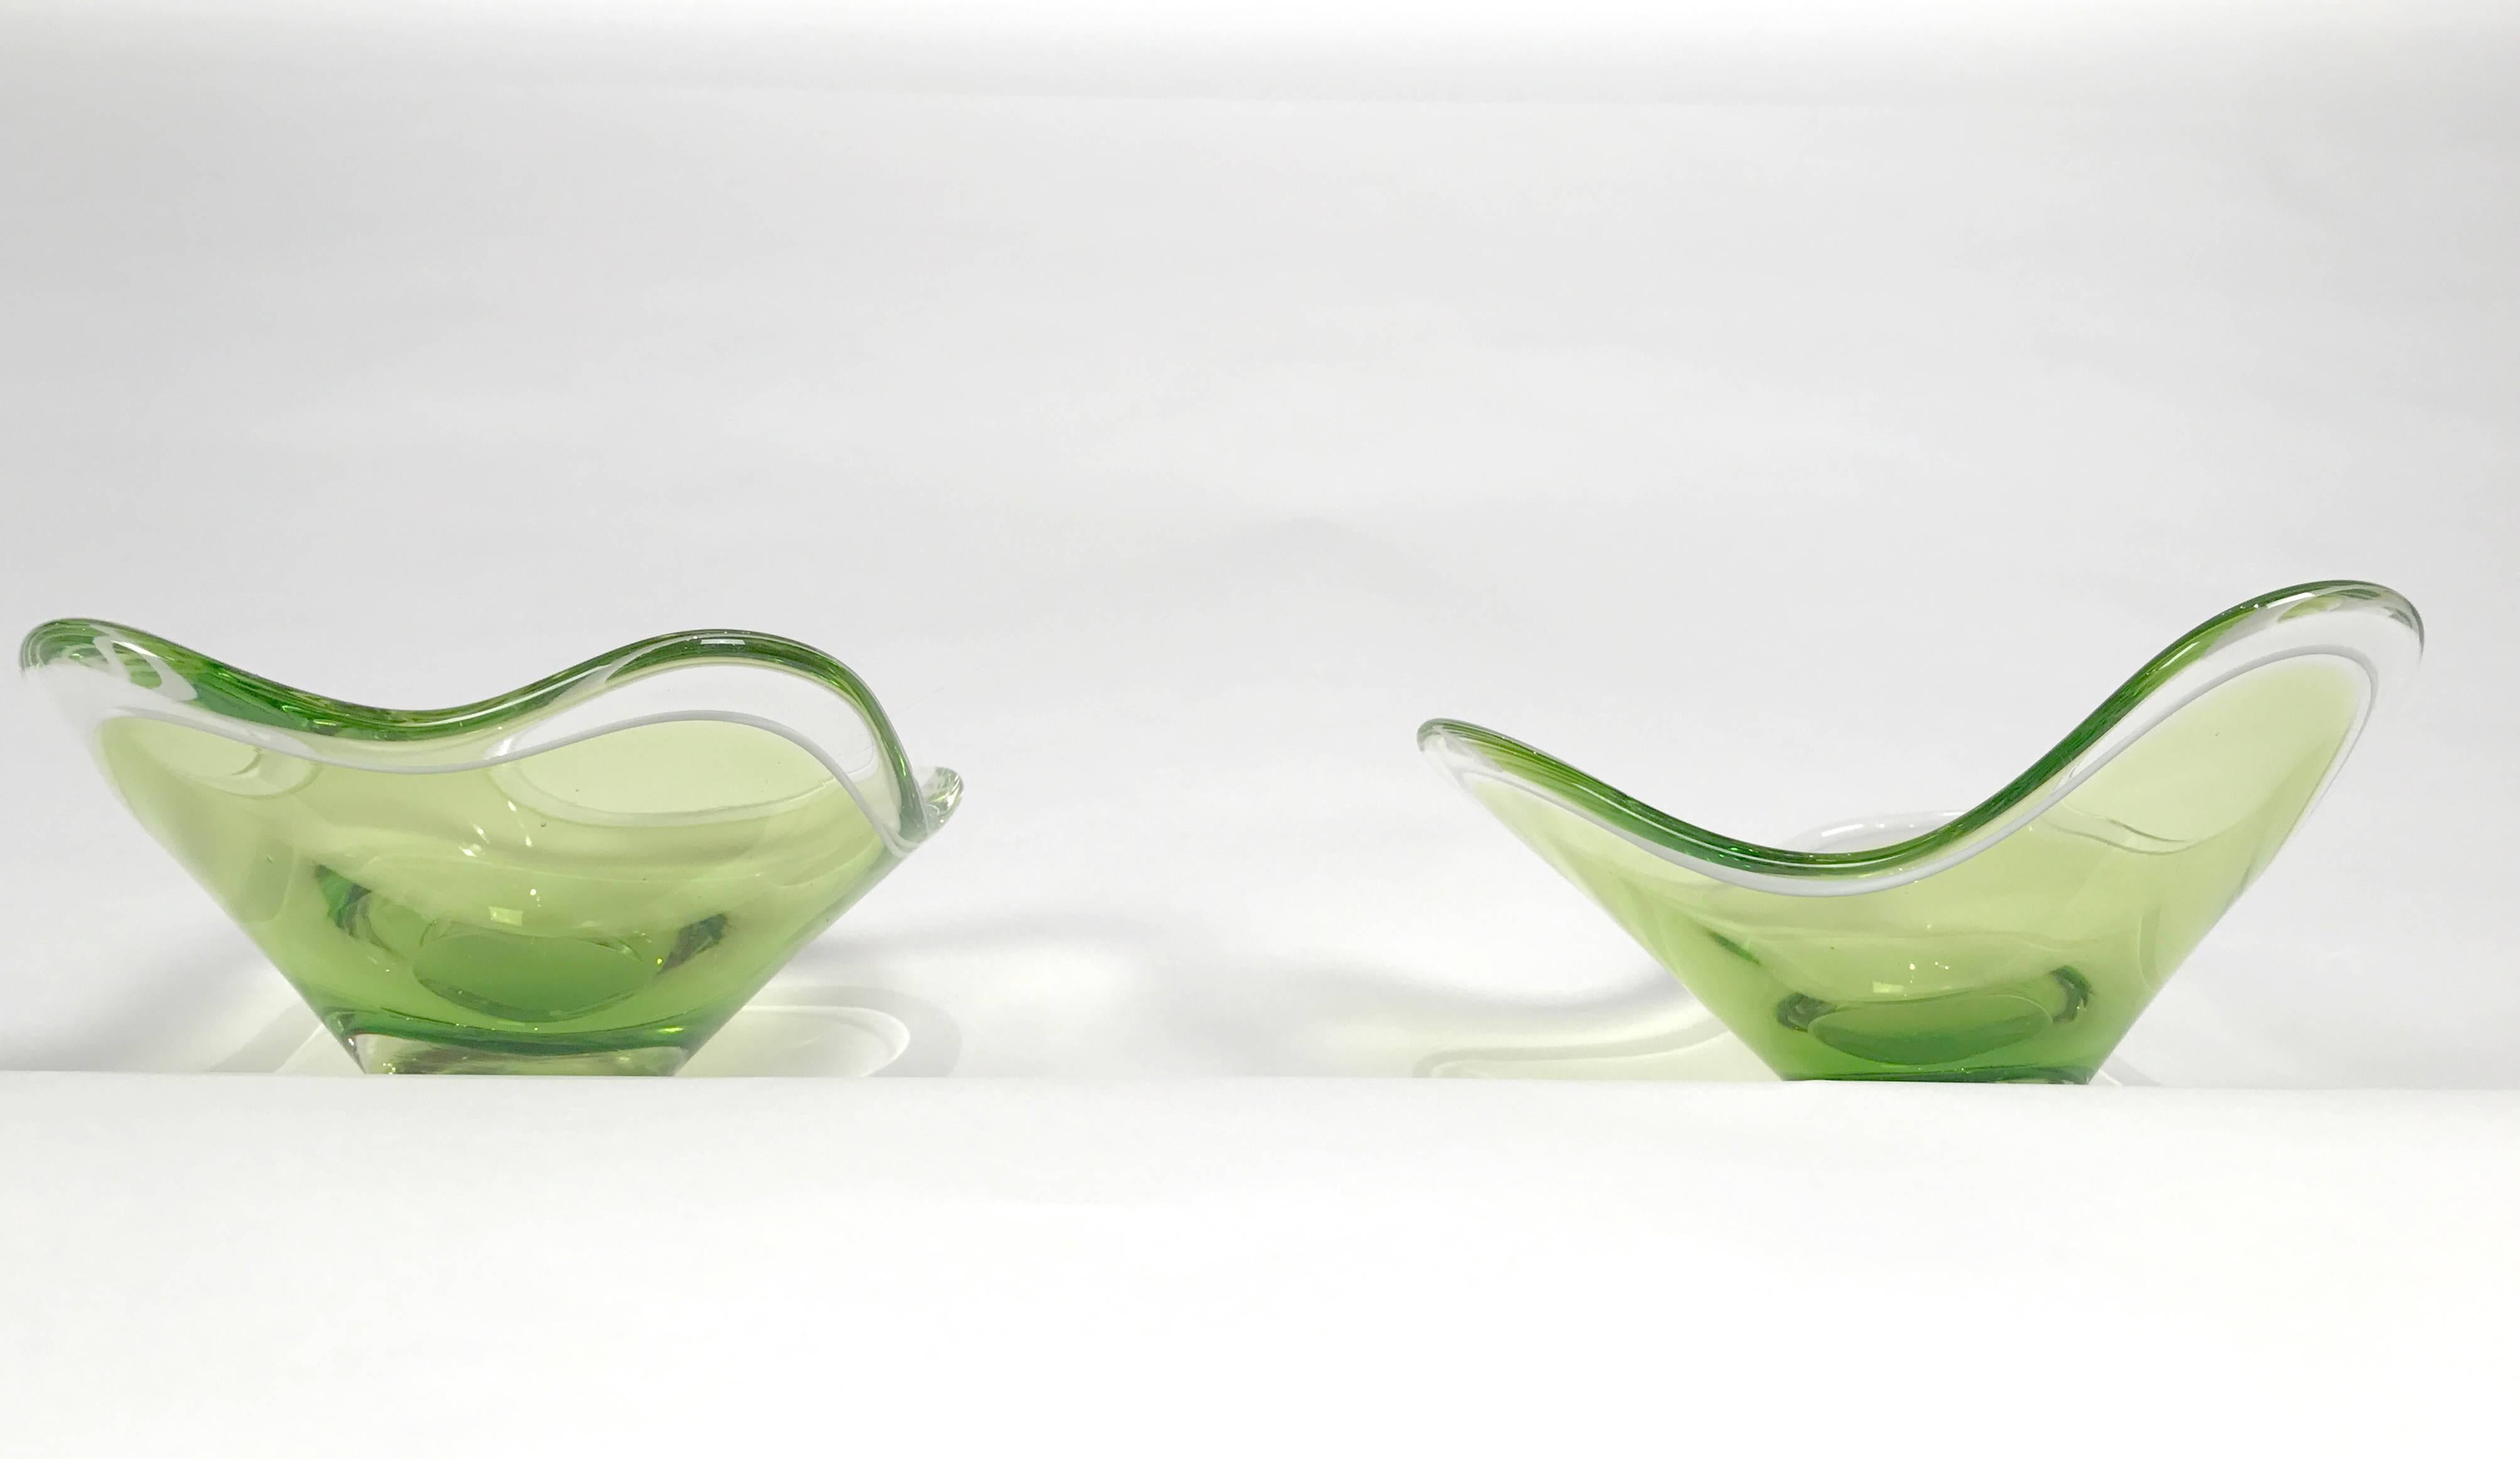 Two beautiful matching glass bowls, one three lobe and one four lobe designed by Paul Kedelv for Flygsfors. Both pieces are in excellent condition and signed Flygsfors, Kedelv, circa 1955.

 Paul Kedelv 1917-1990, worked for Flygsfors in Sweden